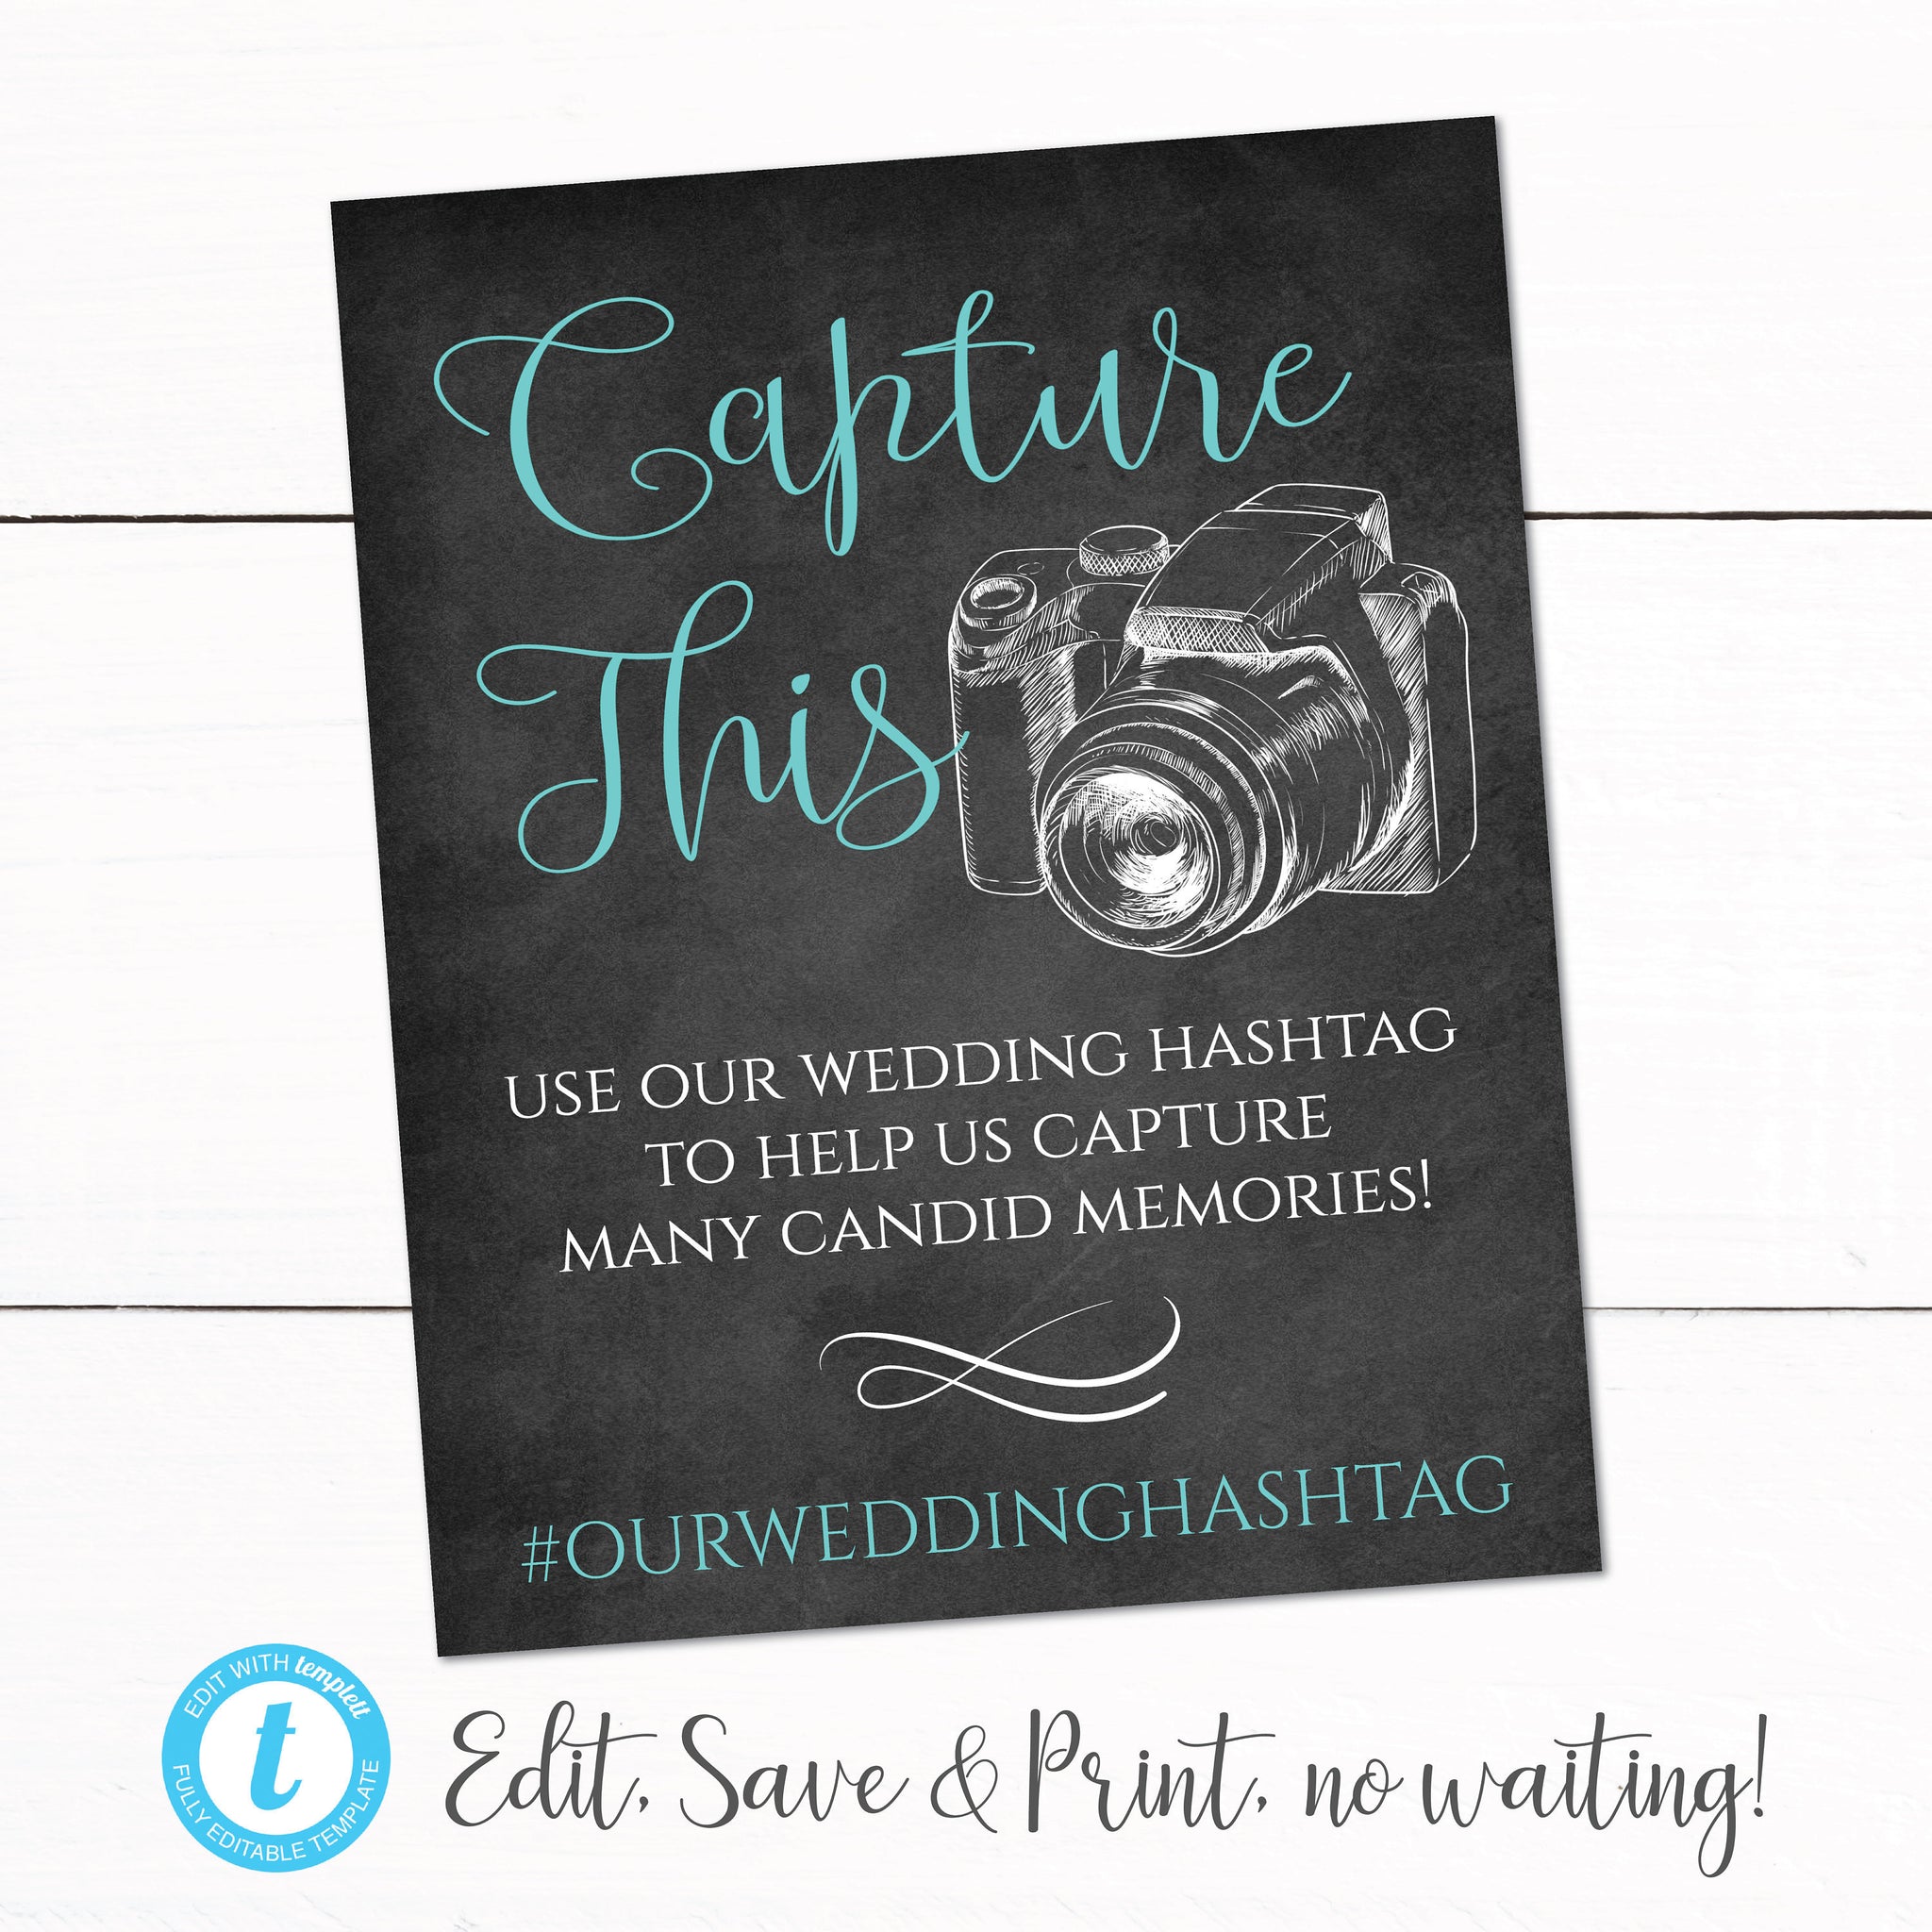 Wedding Hashtag Chalkboard Sign - Anniversary Hashtag Sign - Party Hashtag Sign Camera - Oh Snap Hashtag Sign - Wedding Event Welcome Sign